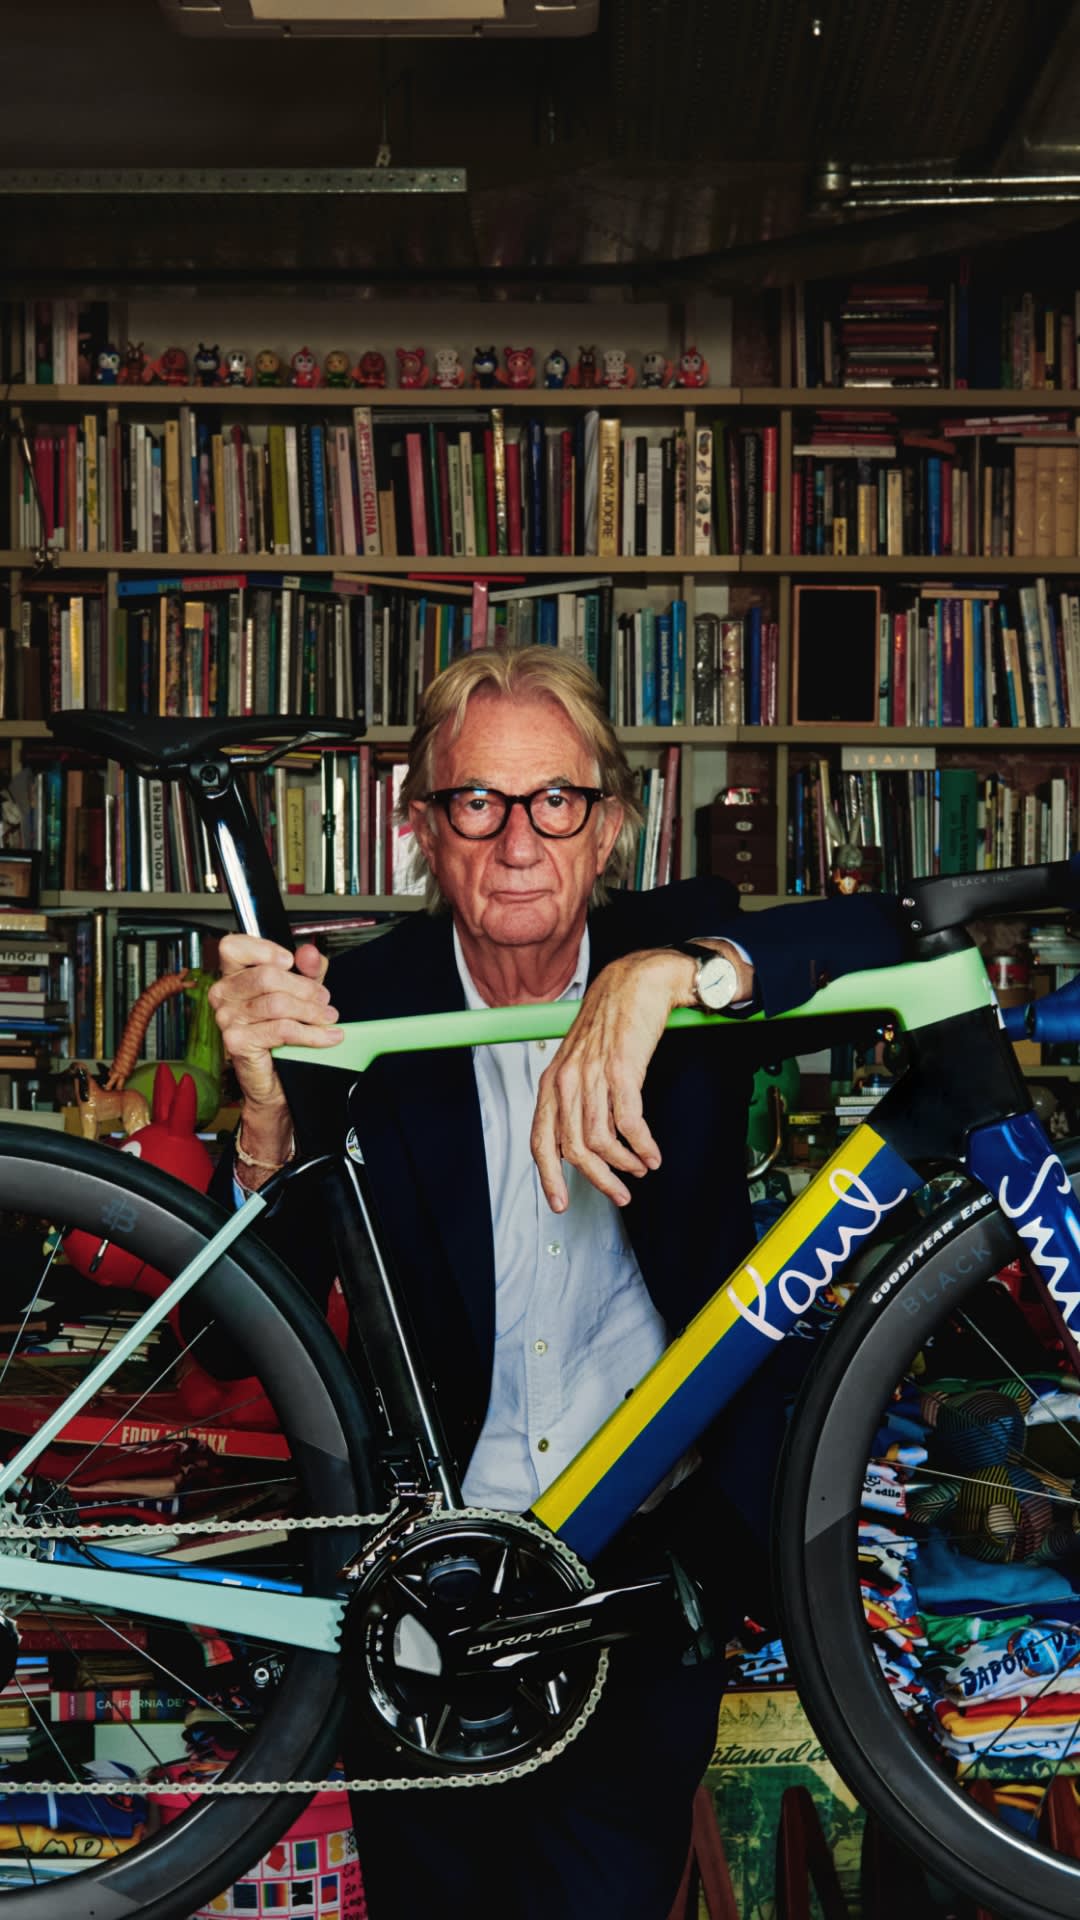 Factor x Paul Smith - Bringing Cycling & Fashion Together